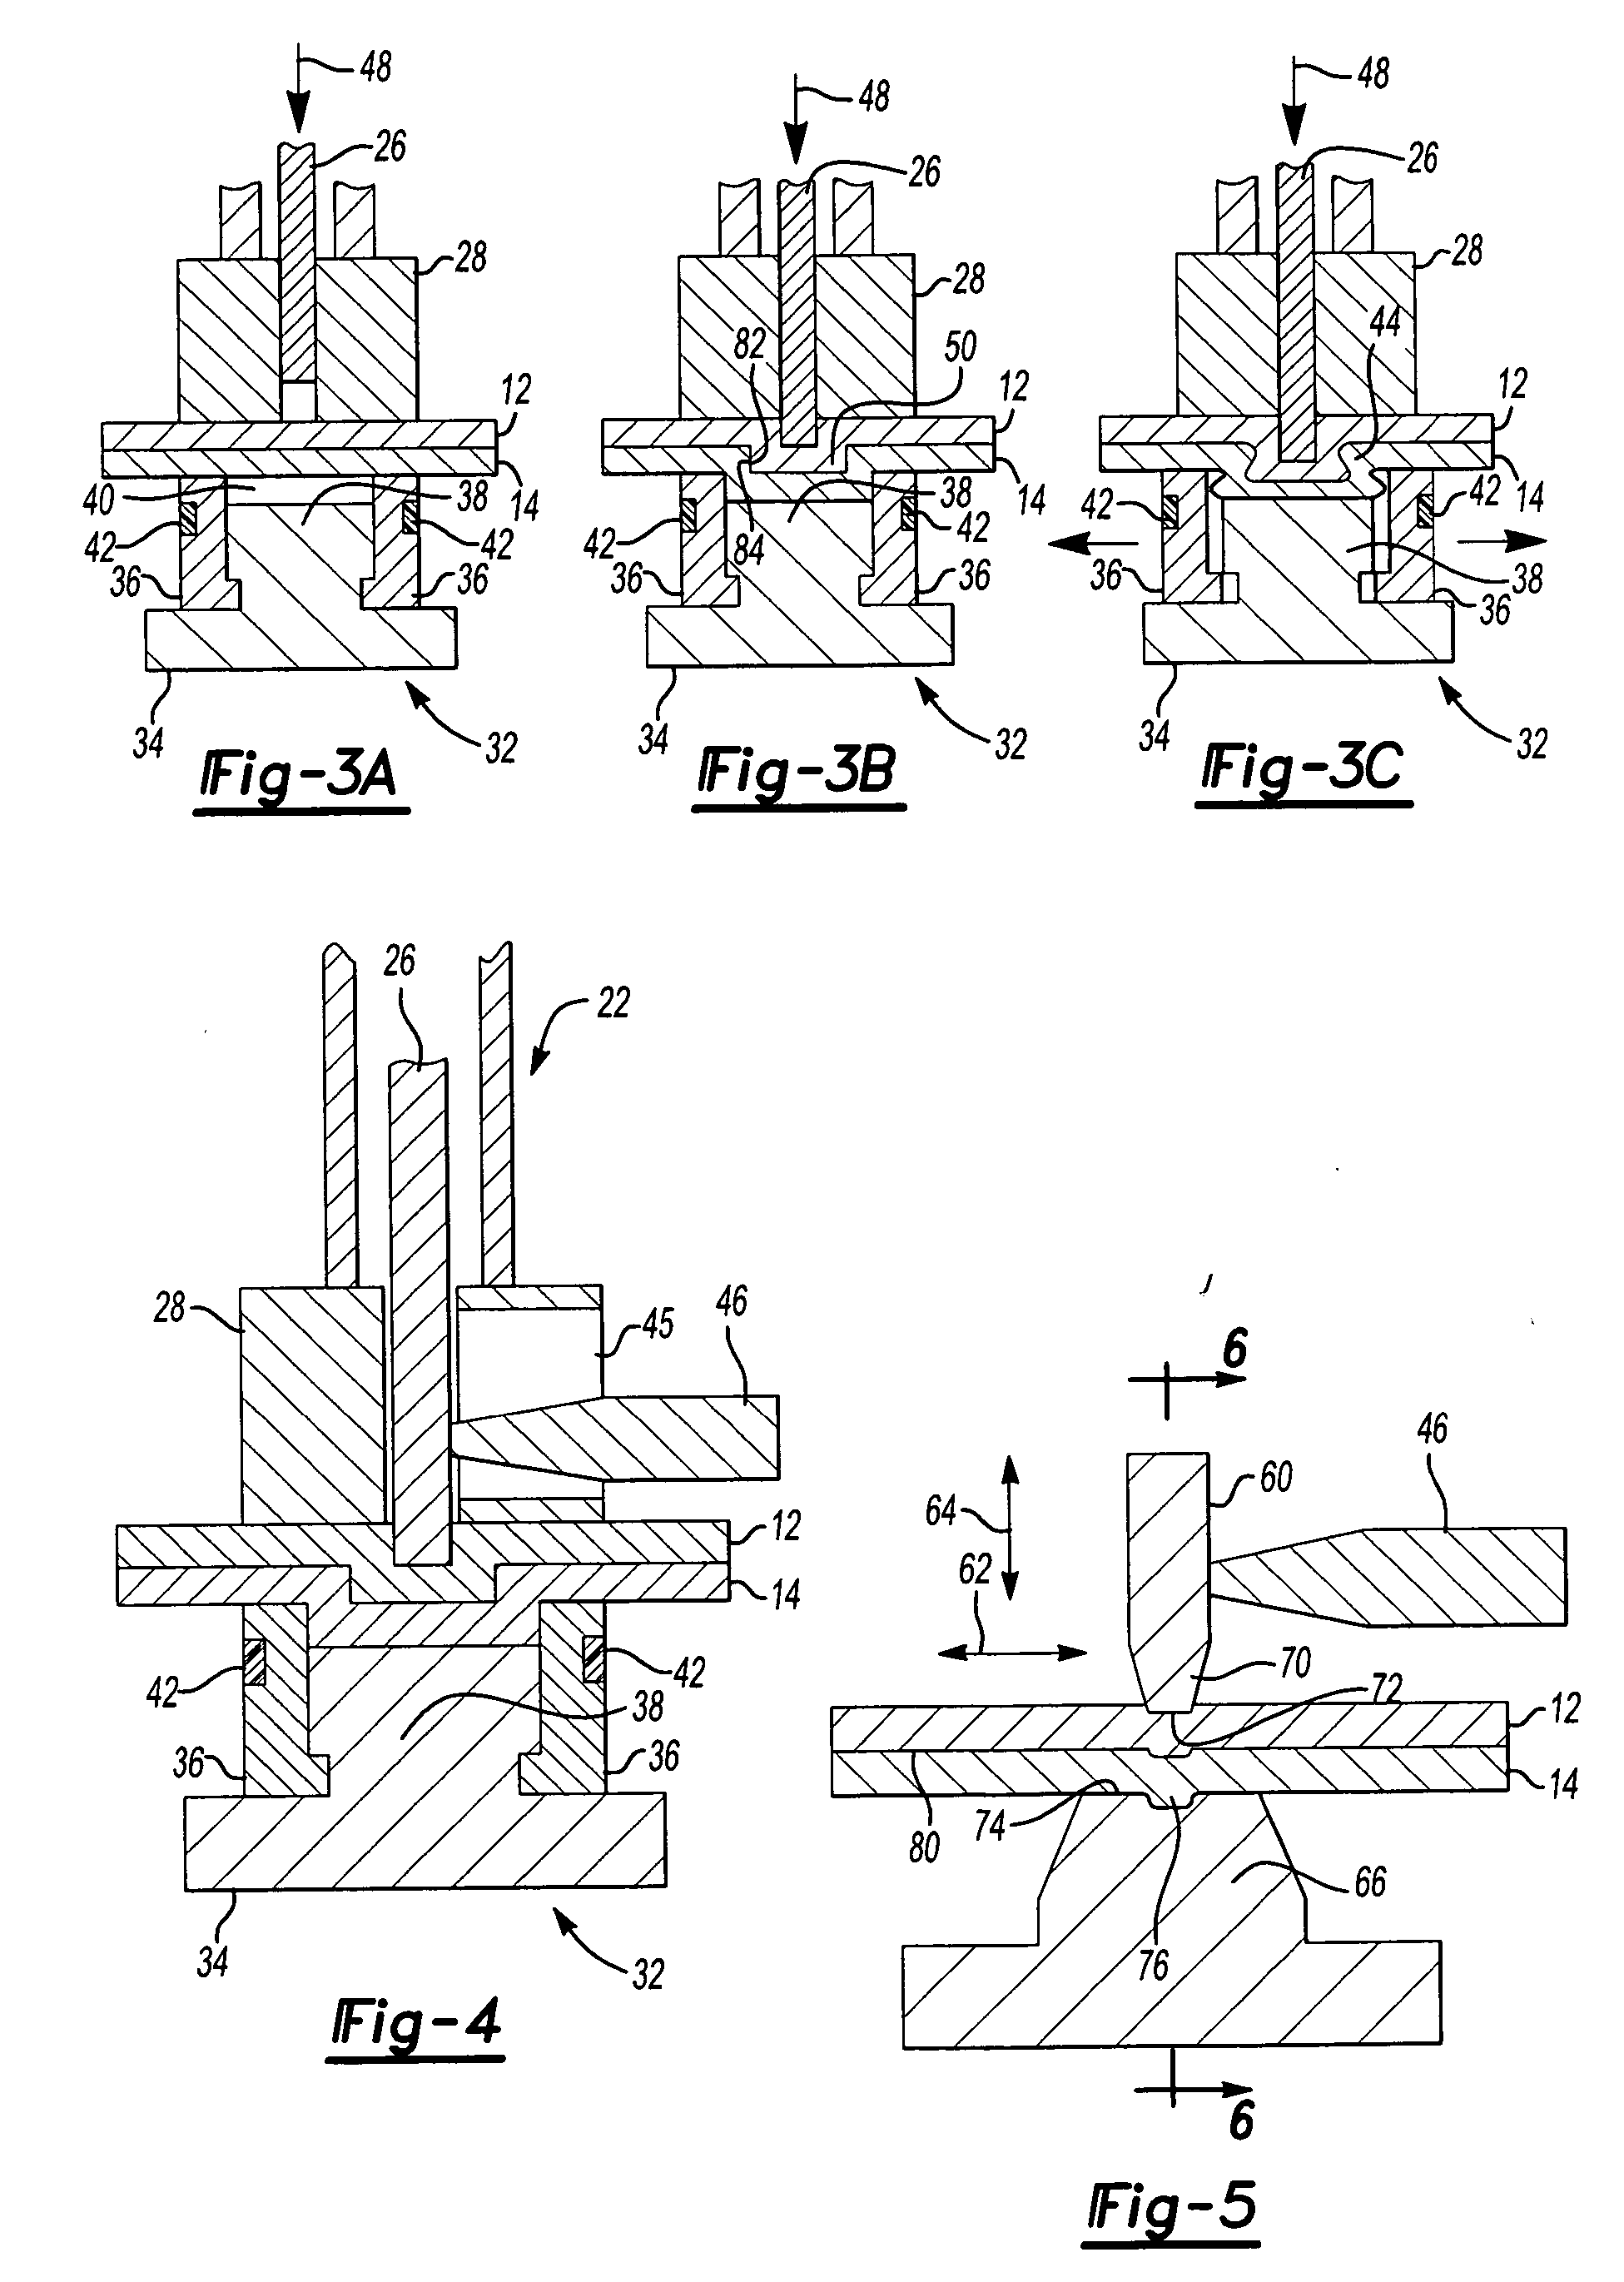 Apparatus and method for forming a joint between adjacent members